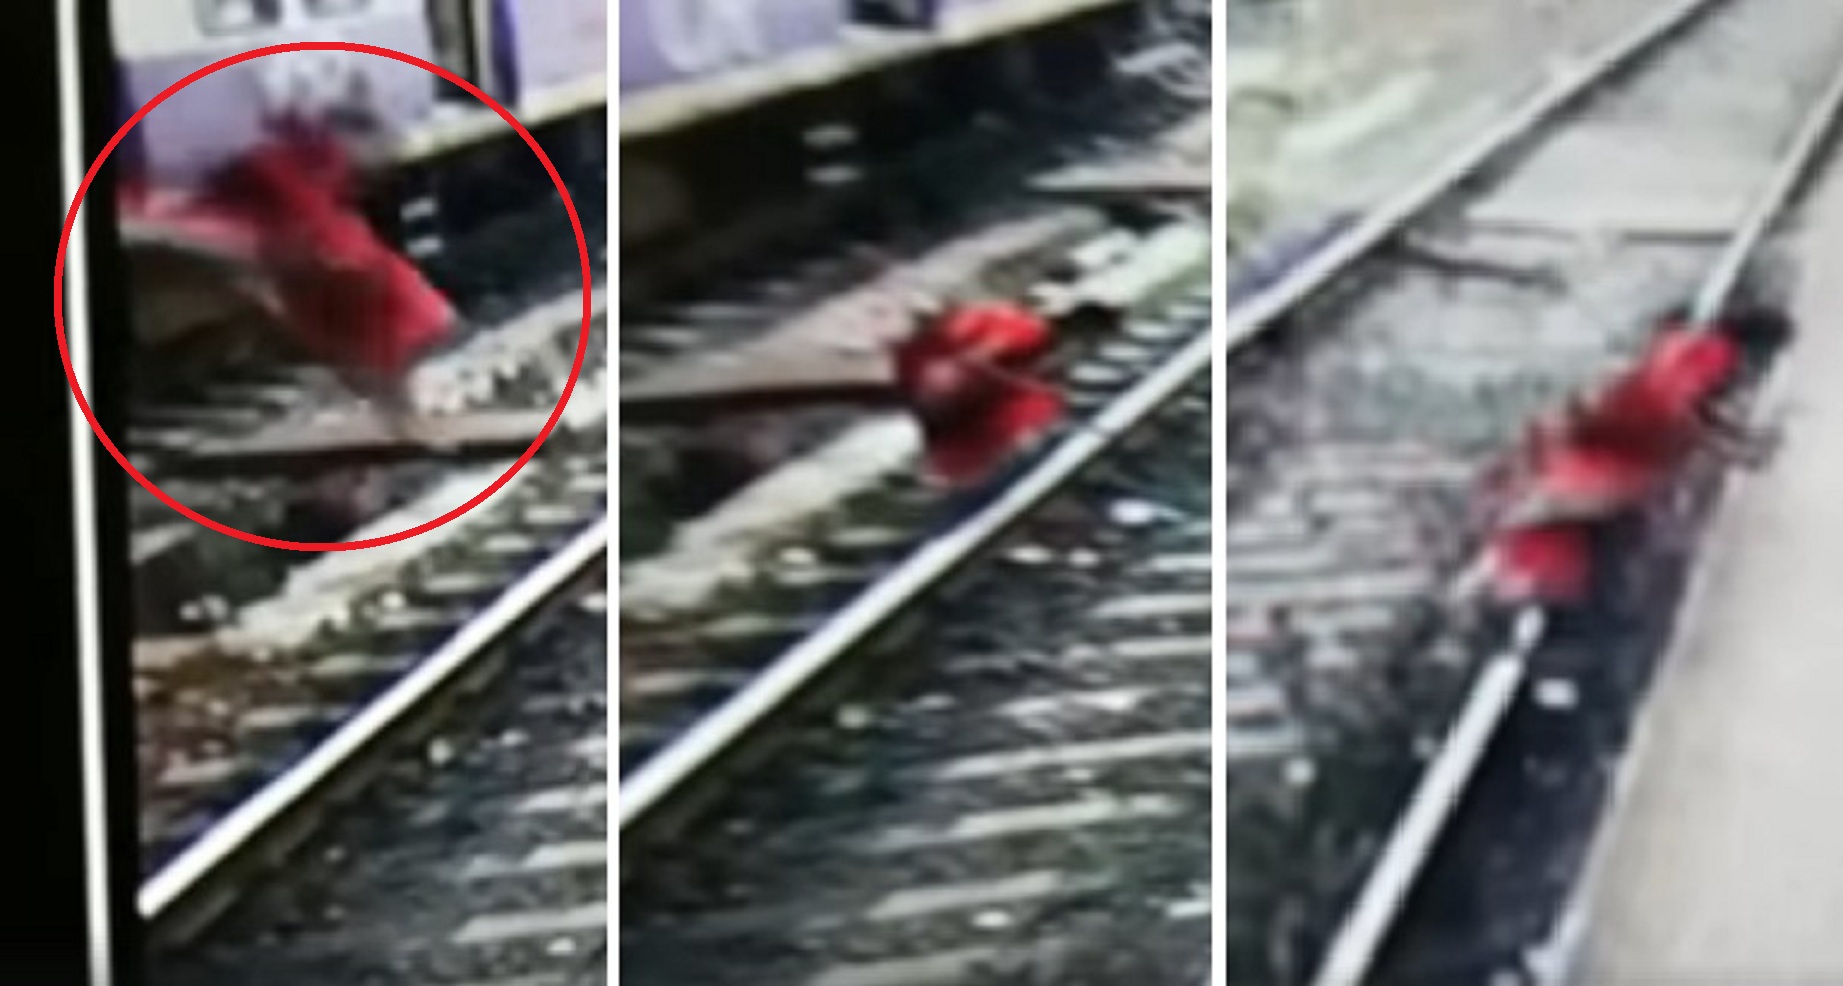 CCTV Captures Female Chain-Snatcher Making a Dramatic Escape Running Past the Railway Tracks